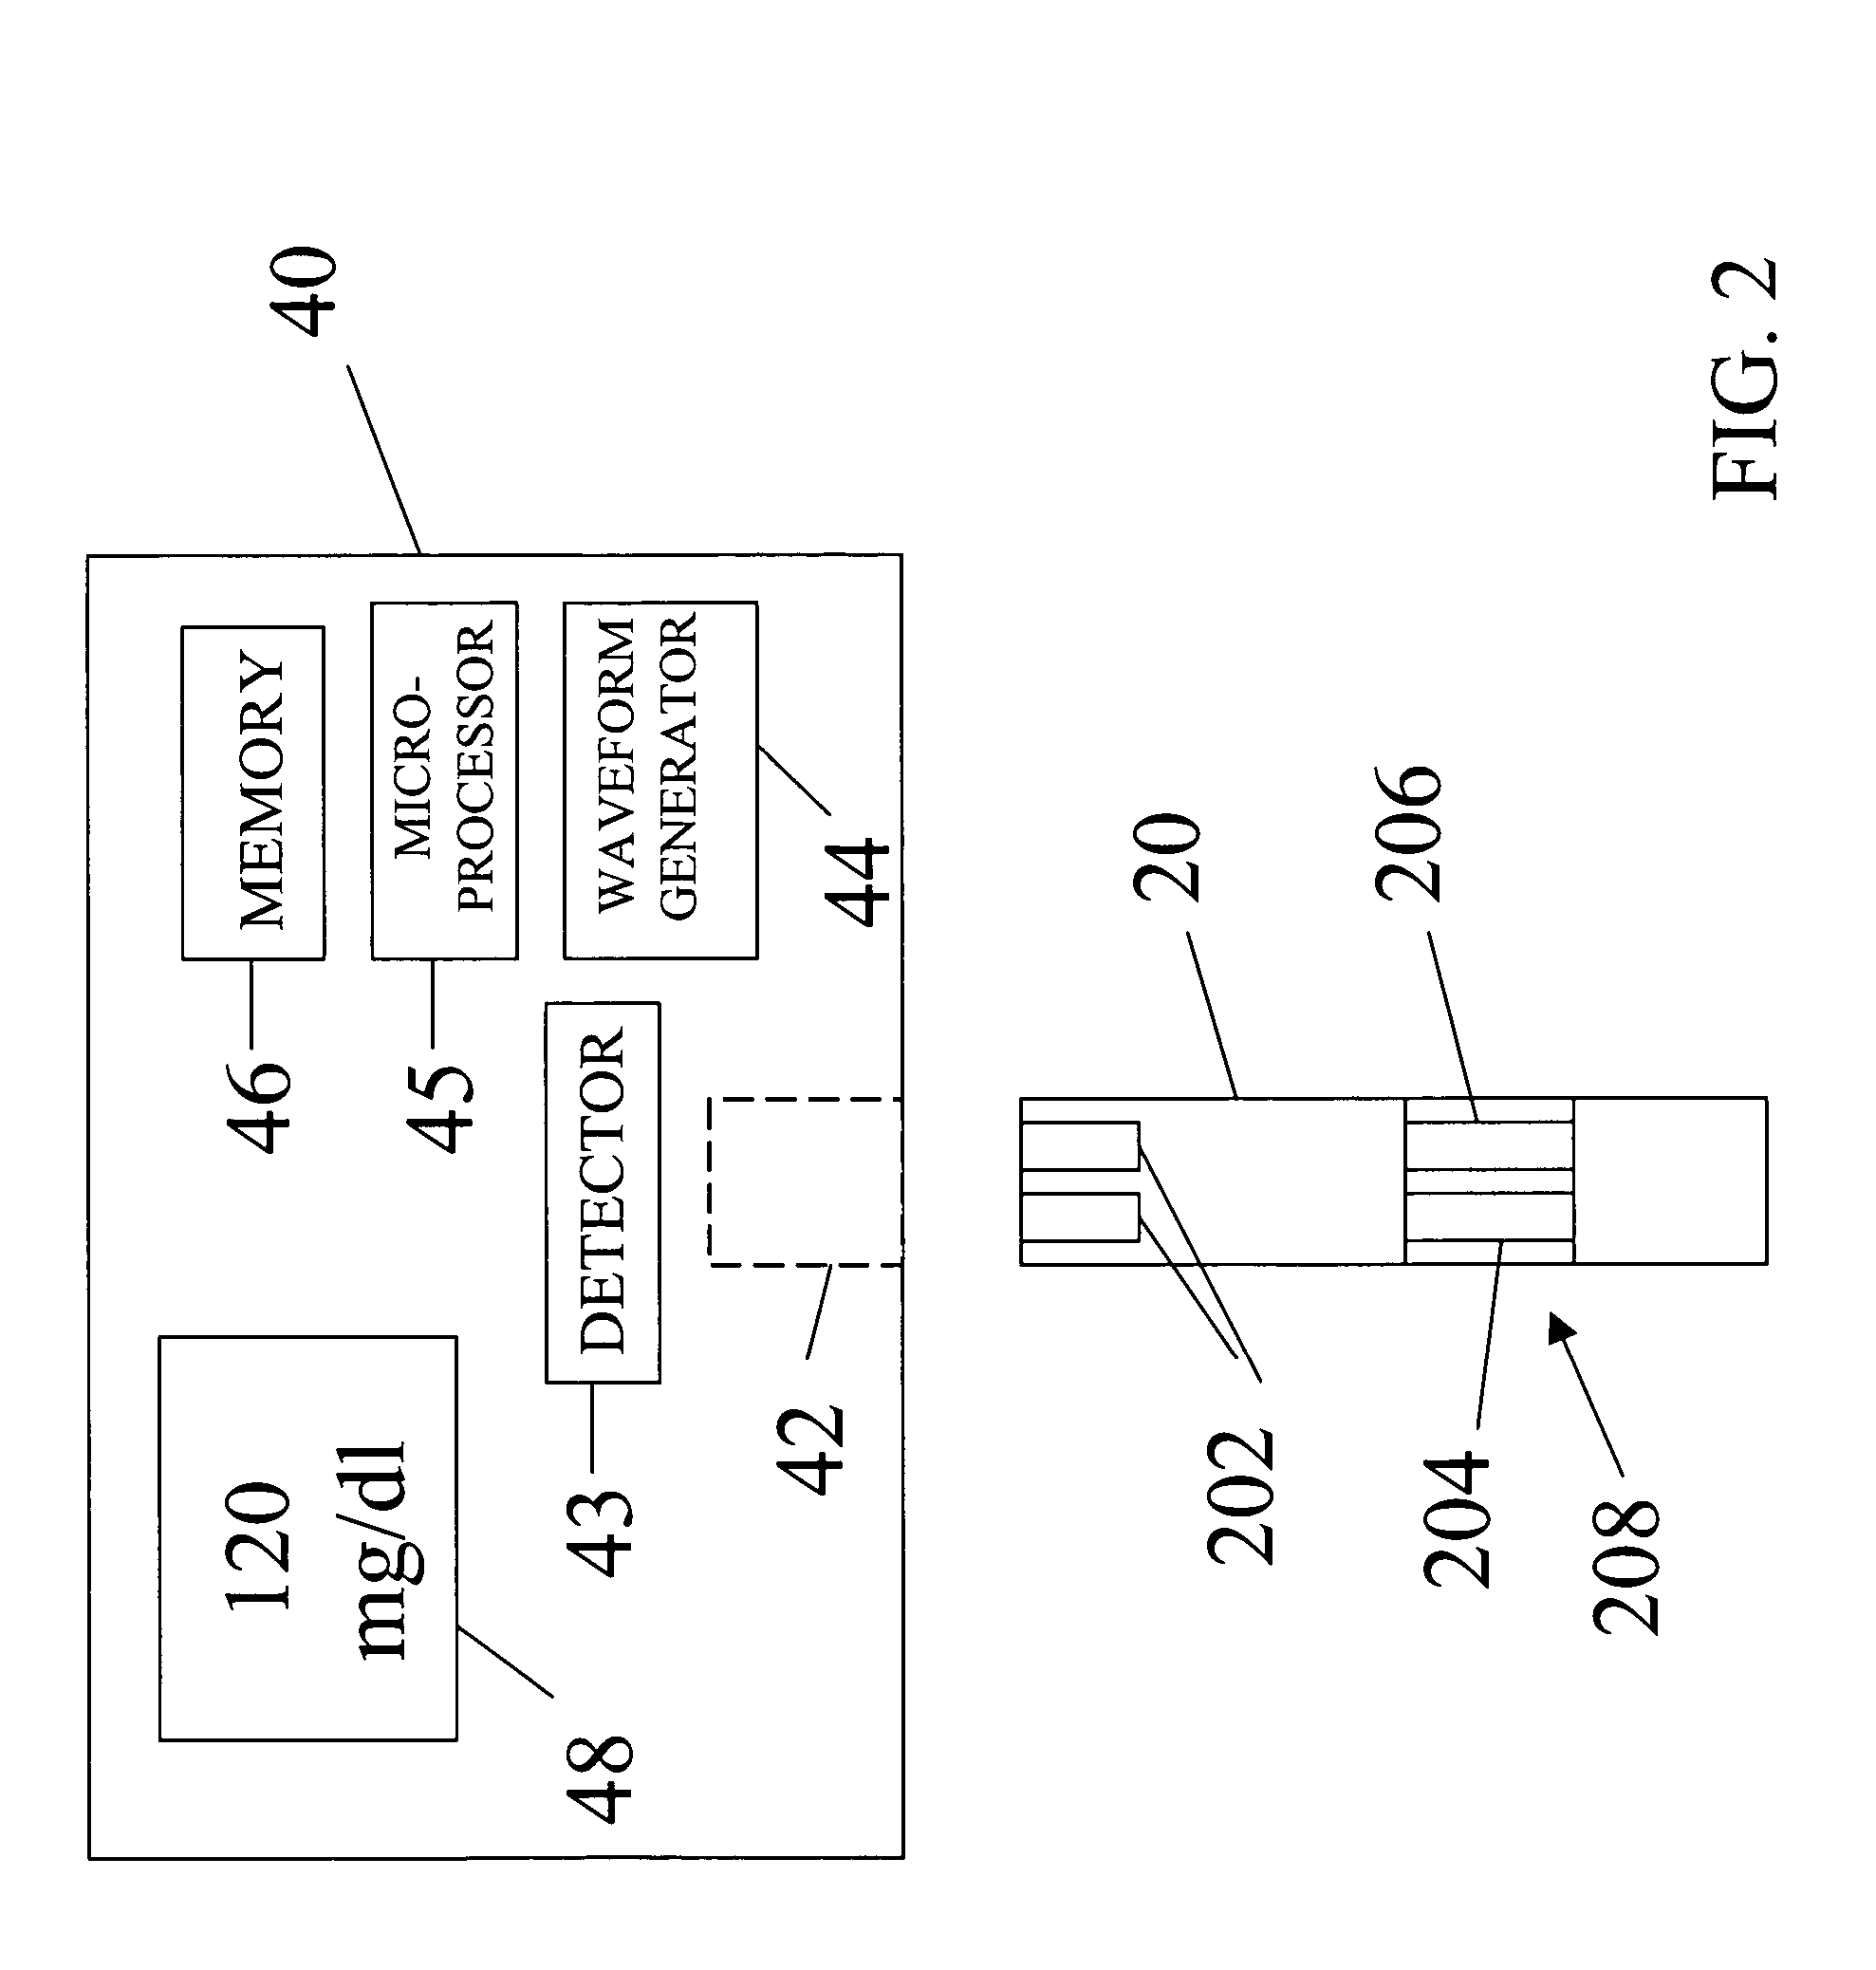 Method and apparatus for electrochemical detection